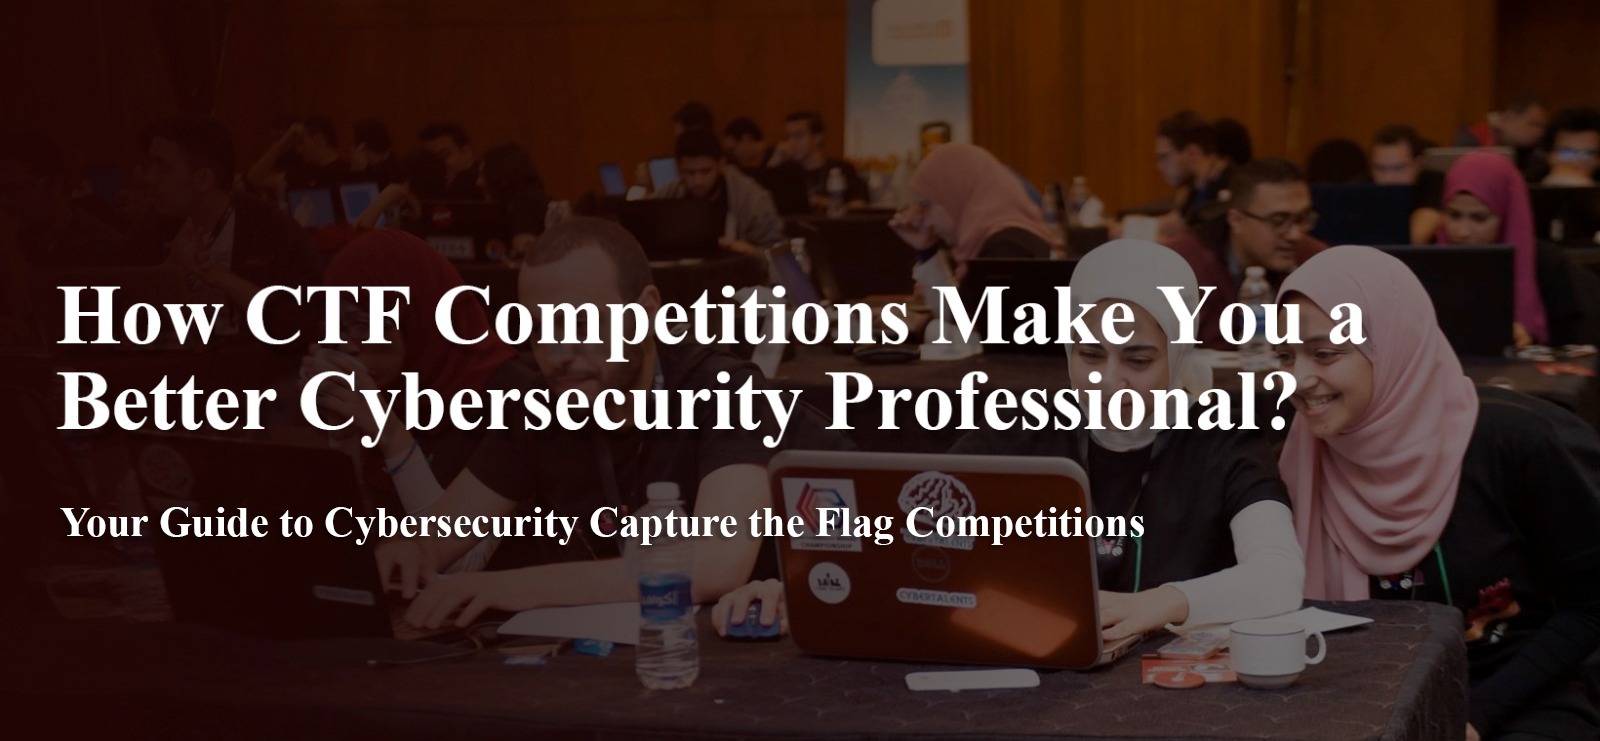 Hacking Competitions and CTFs That Helped Me Learn Cybersecurity